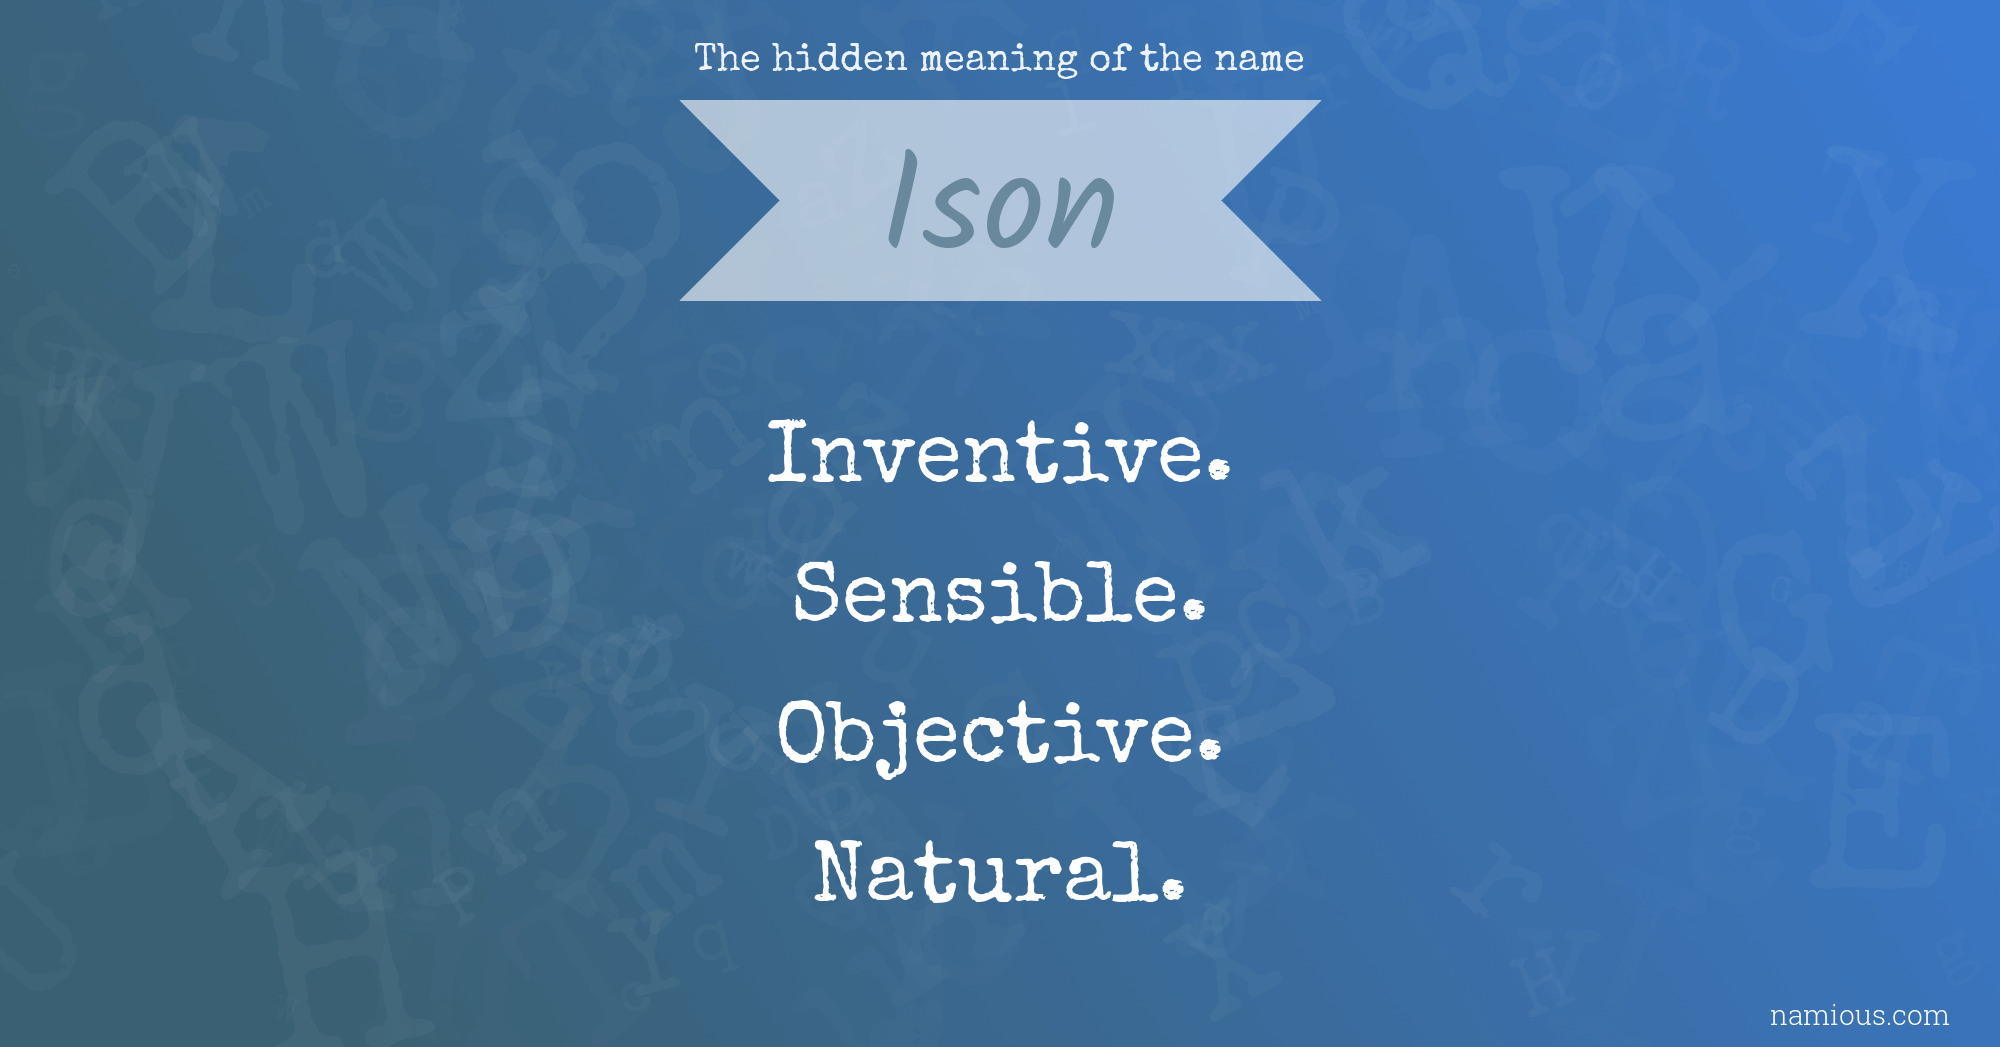 The hidden meaning of the name Ison